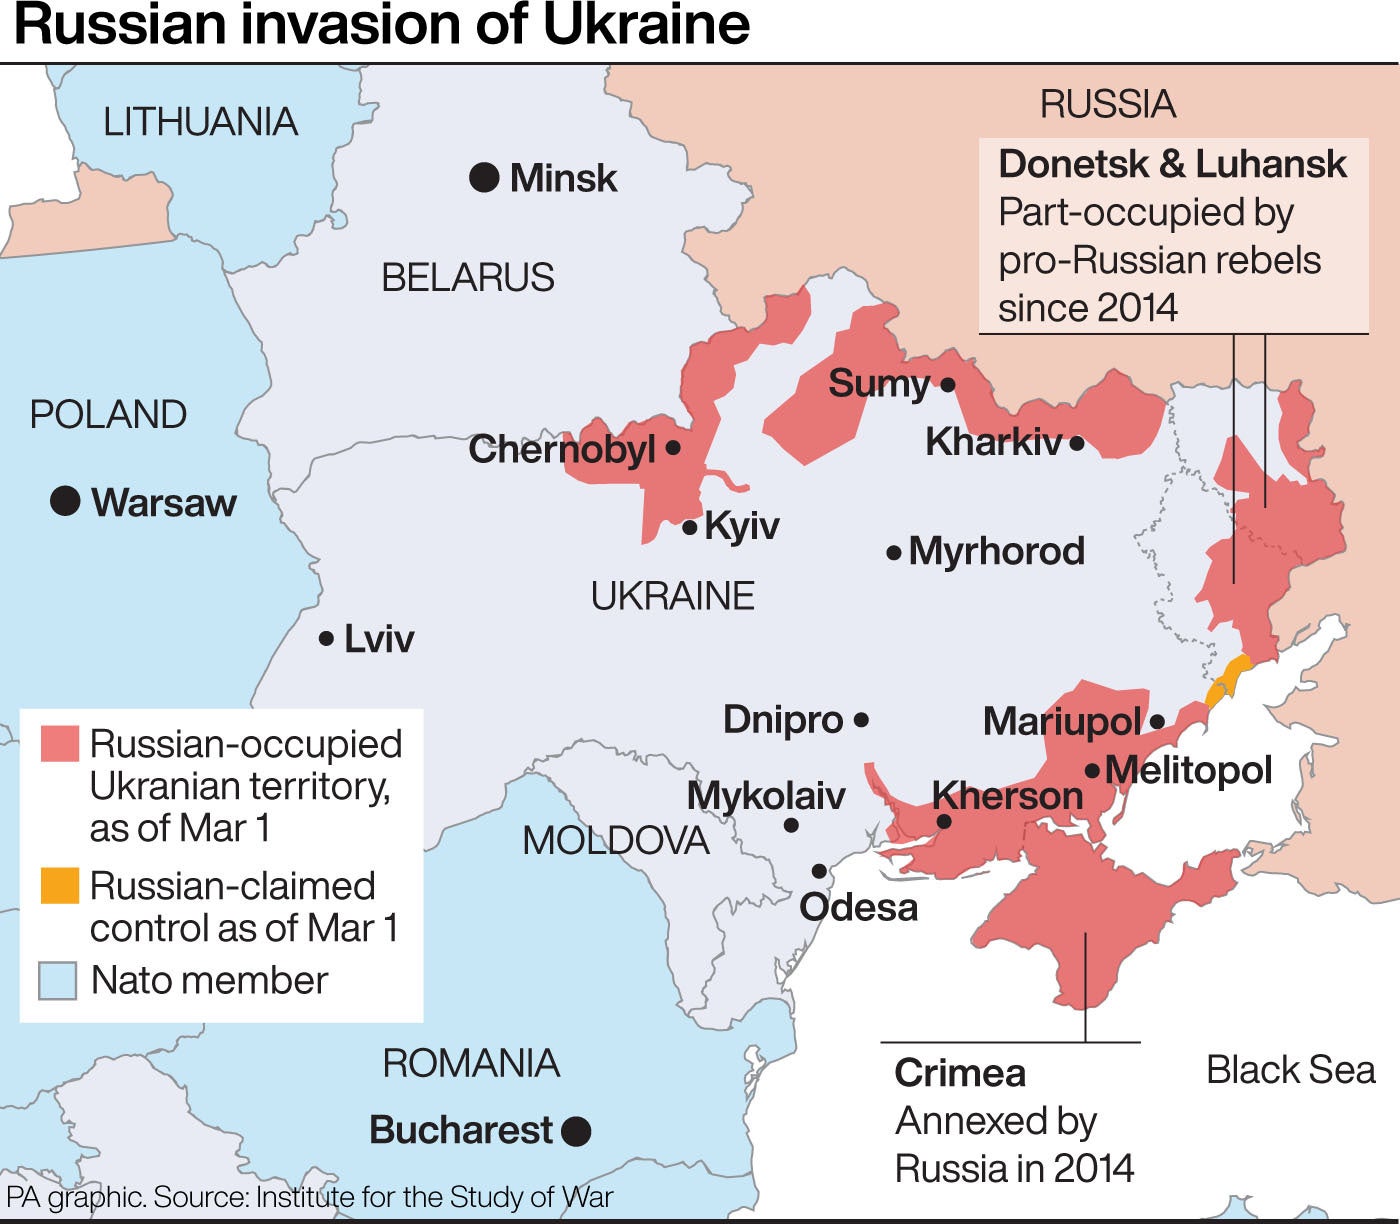 This map shows the extent of Russia’s invasion of Ukraine